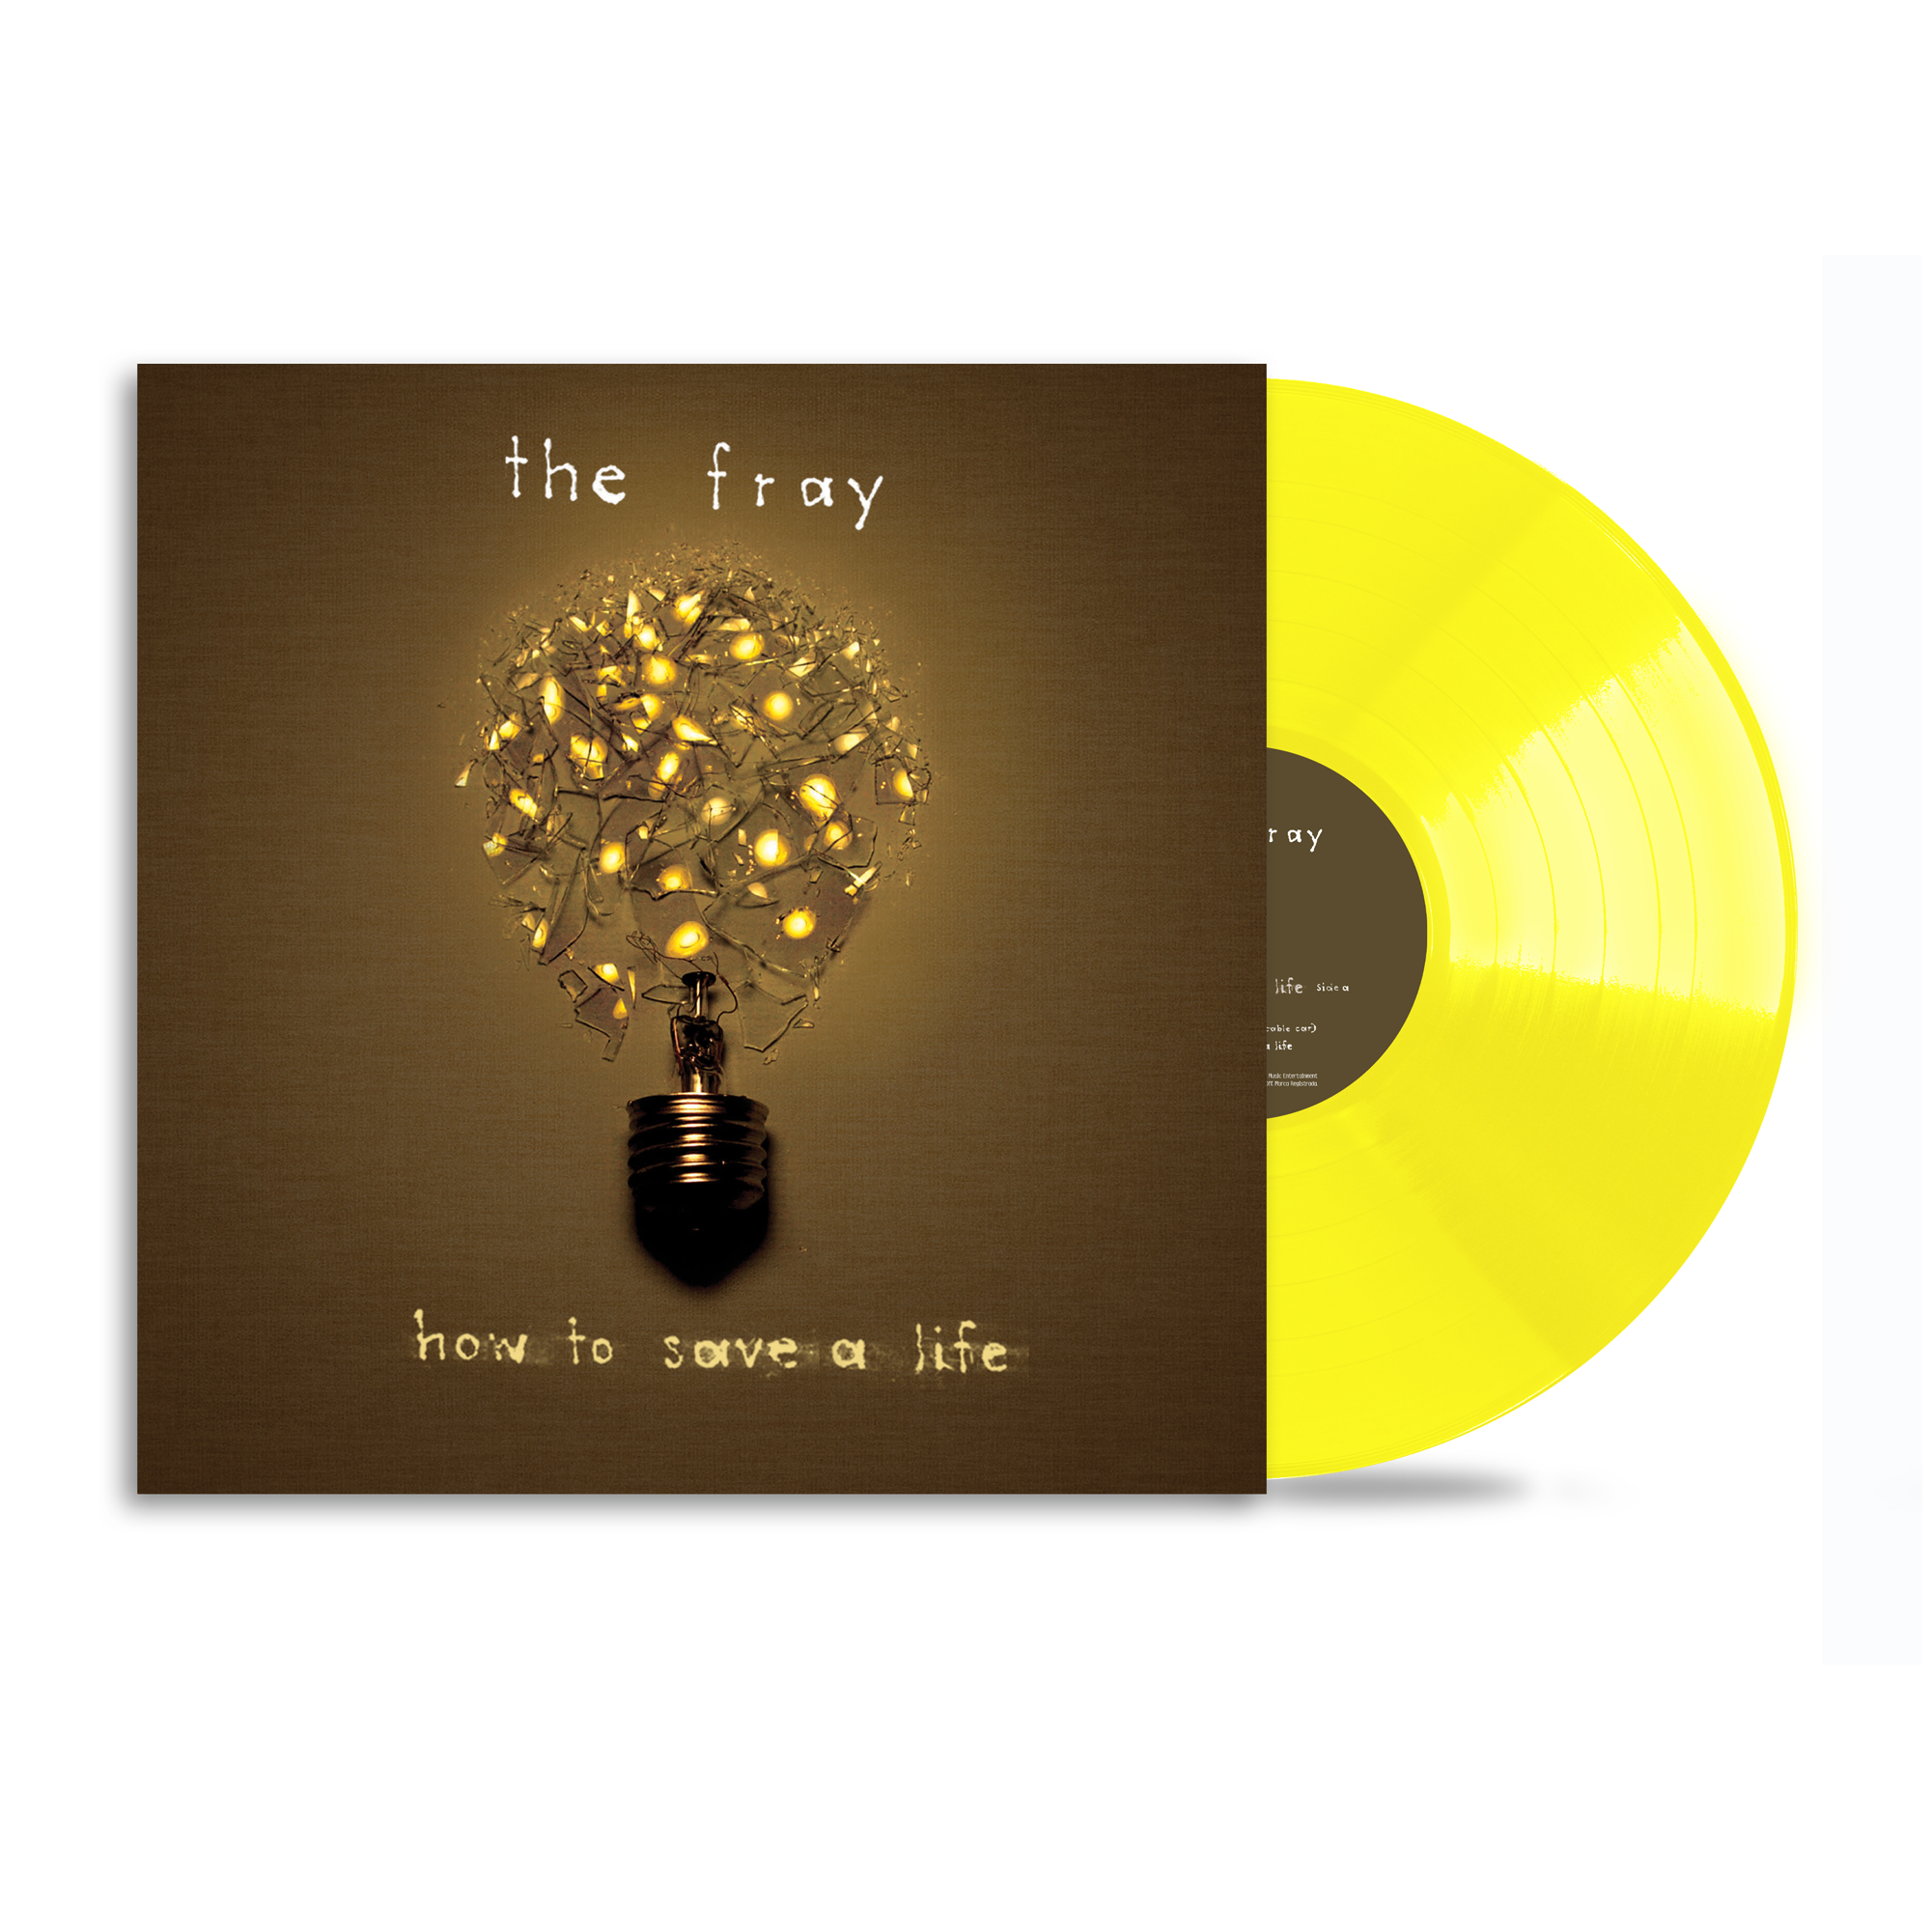 The Fray - How To Save A Life: Limited Yellow Vinyl LP